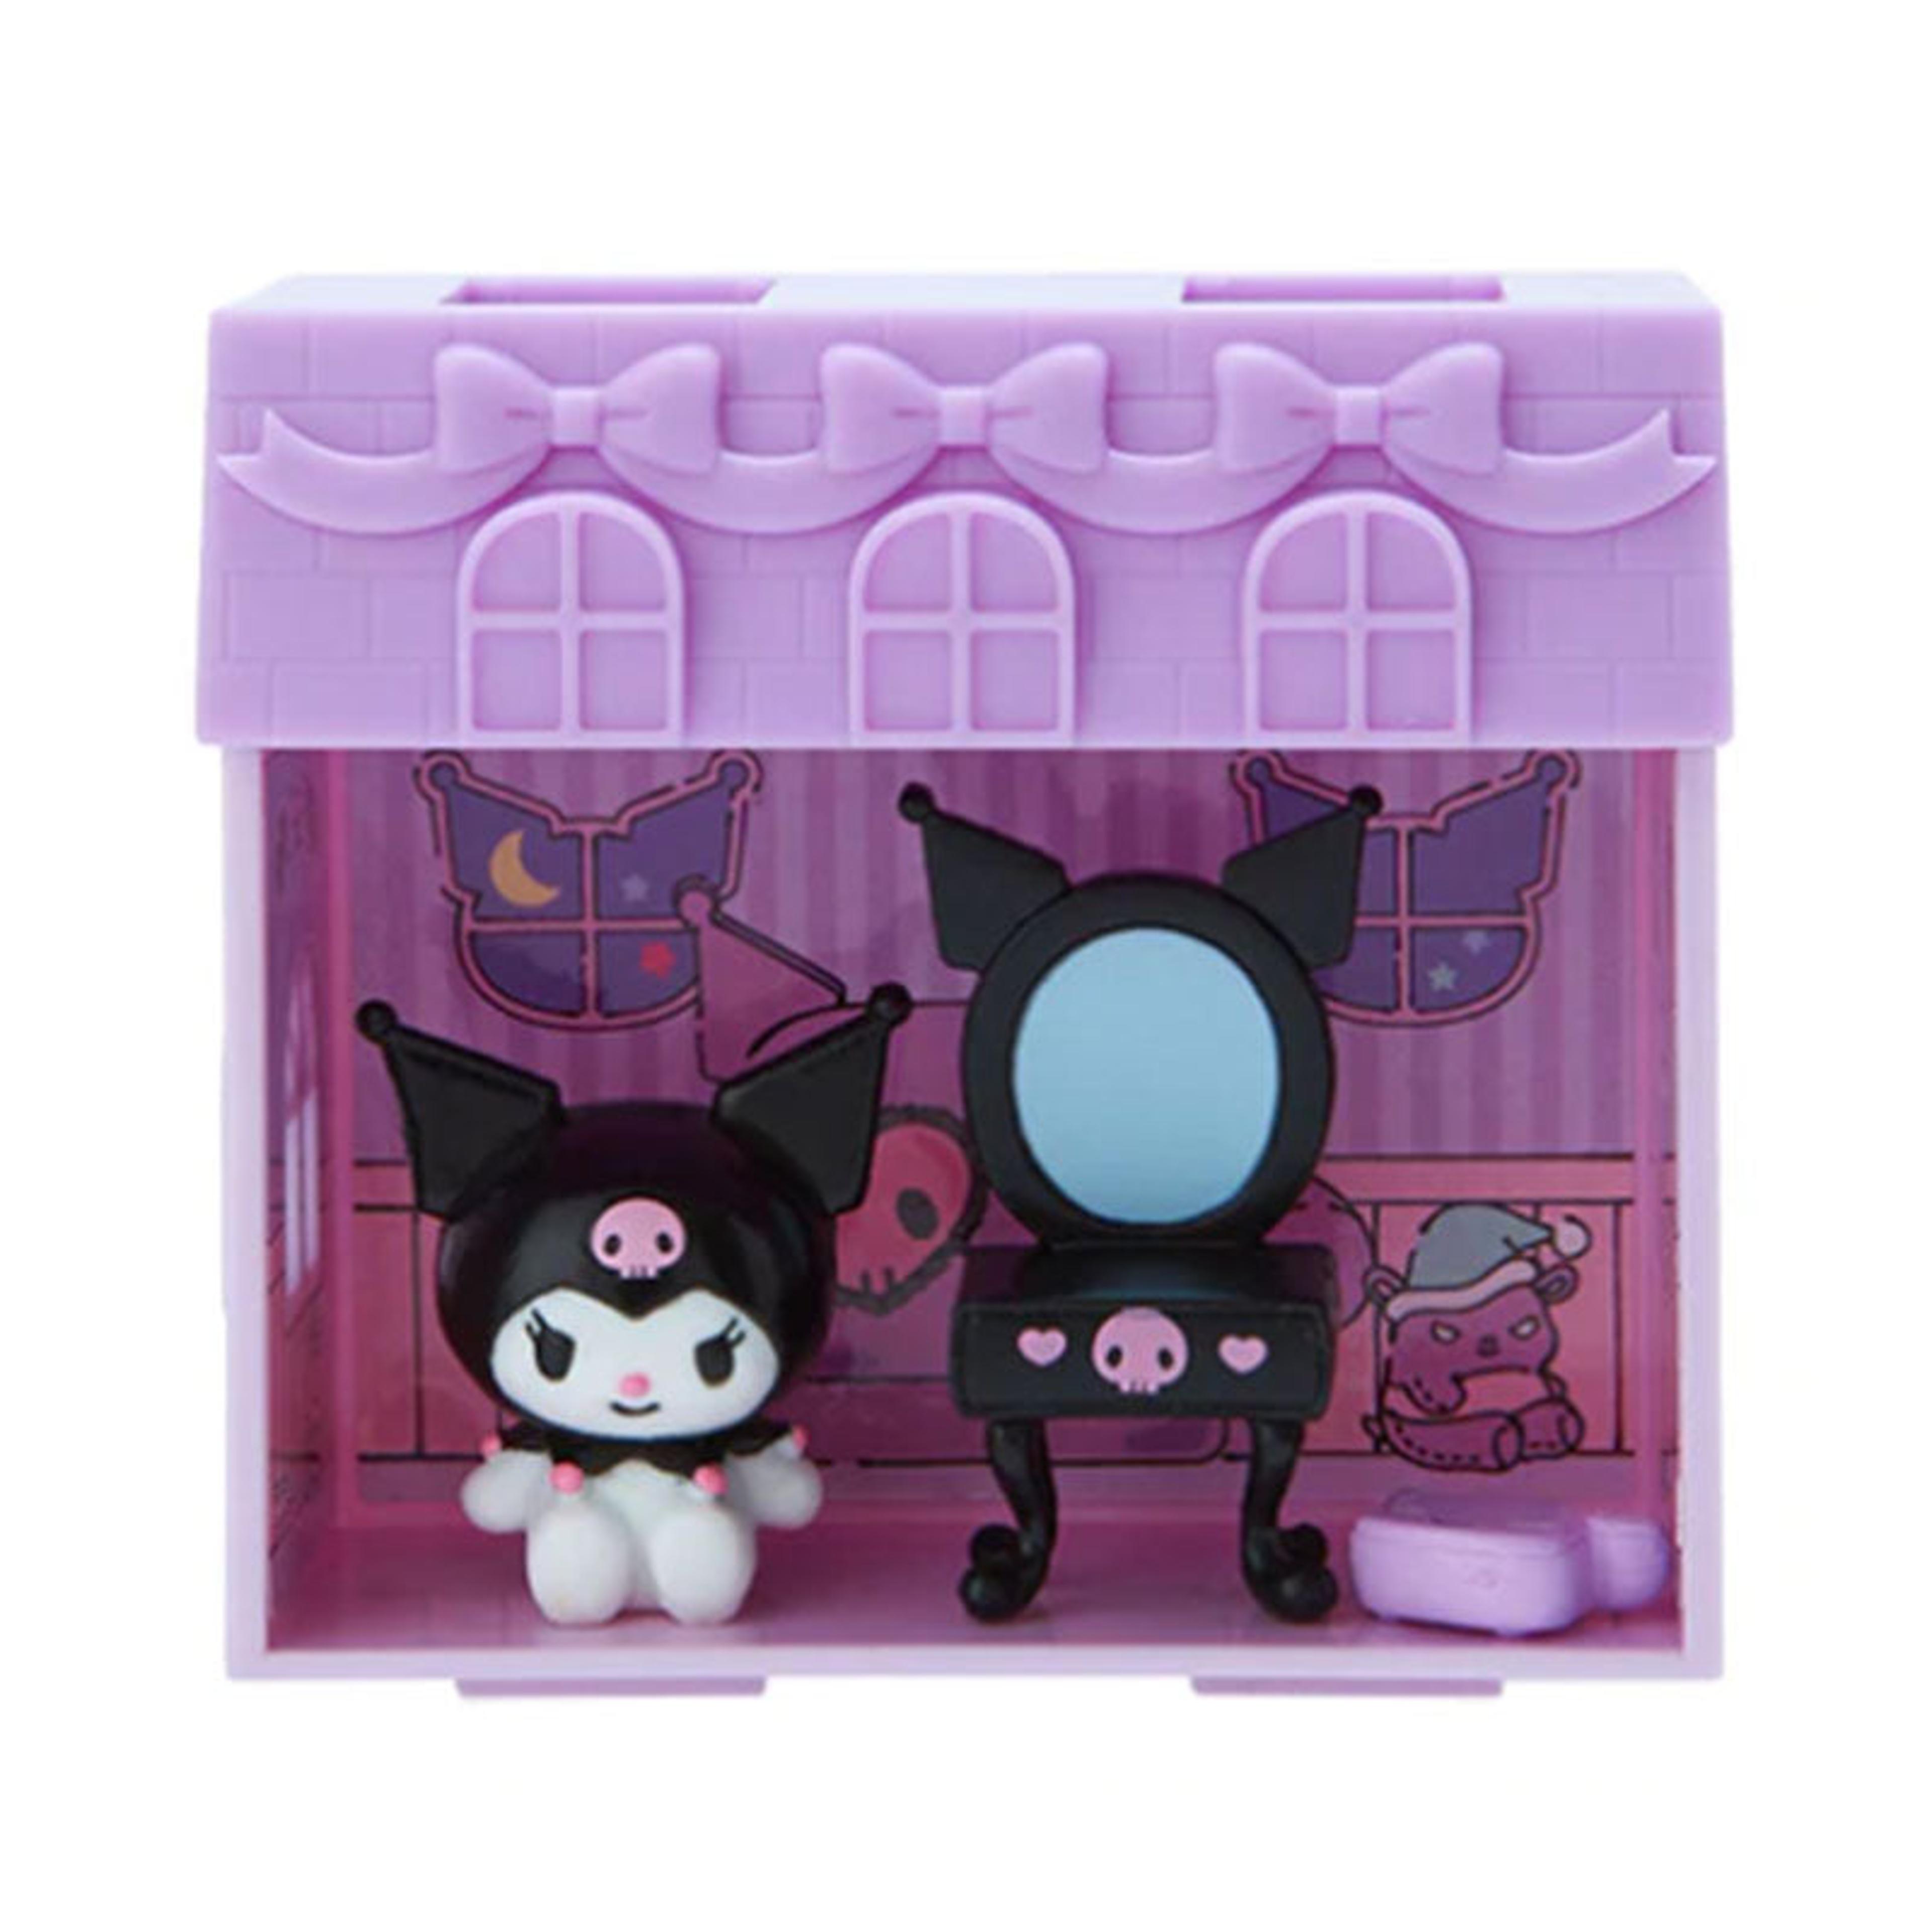 Alternate View 8 of Sanrio Characters Miniature House